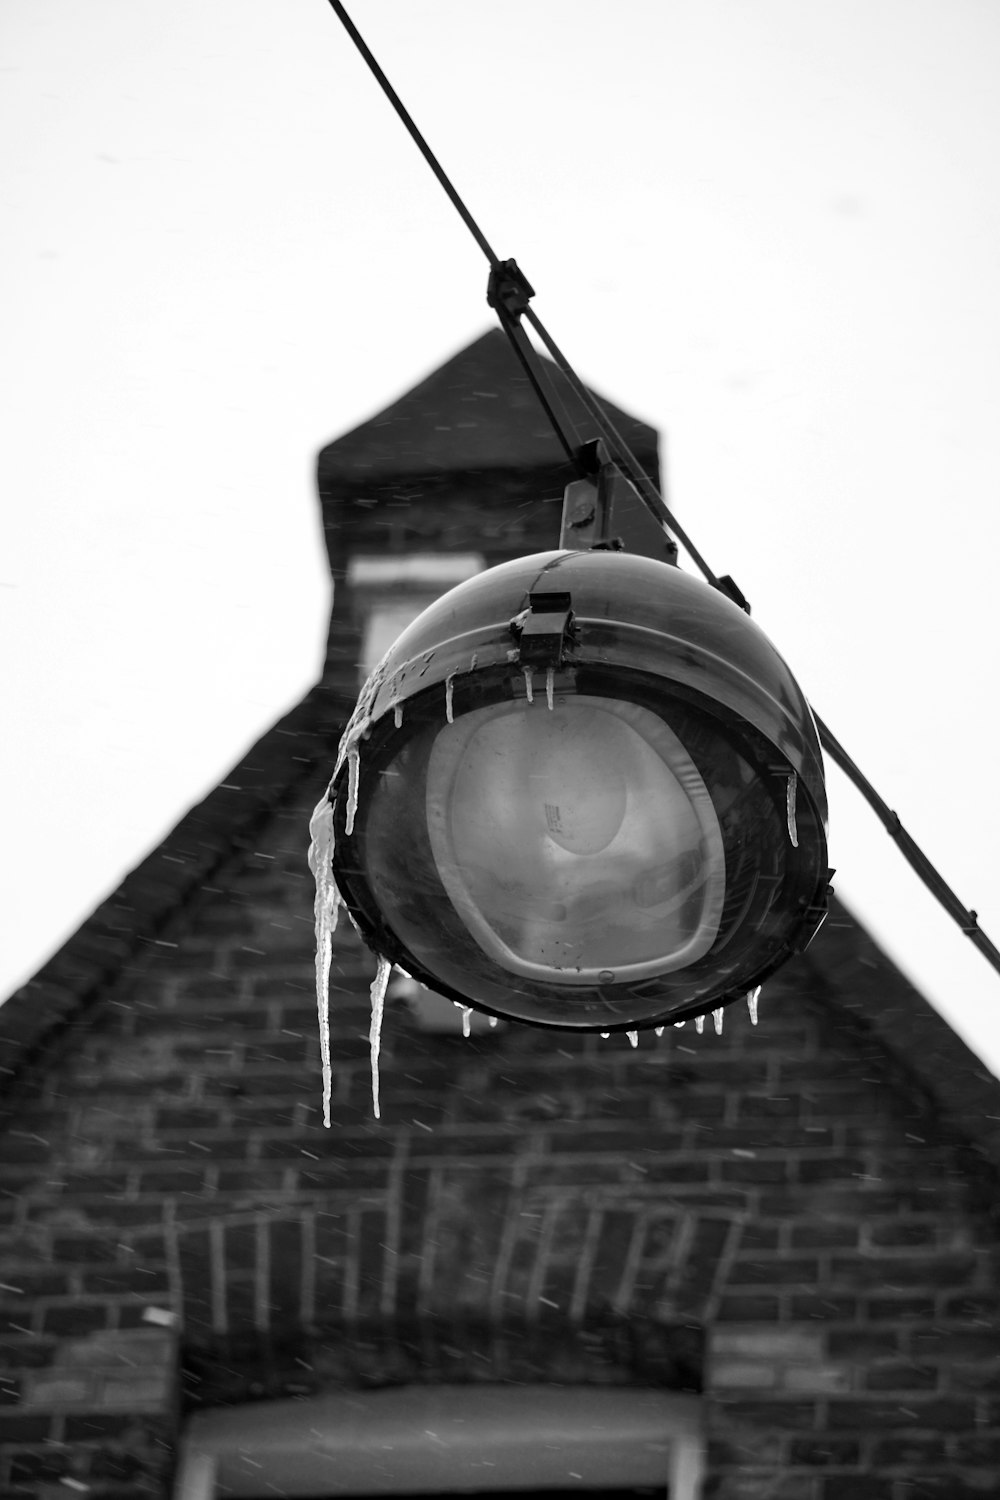 a street light with icicles hanging from it